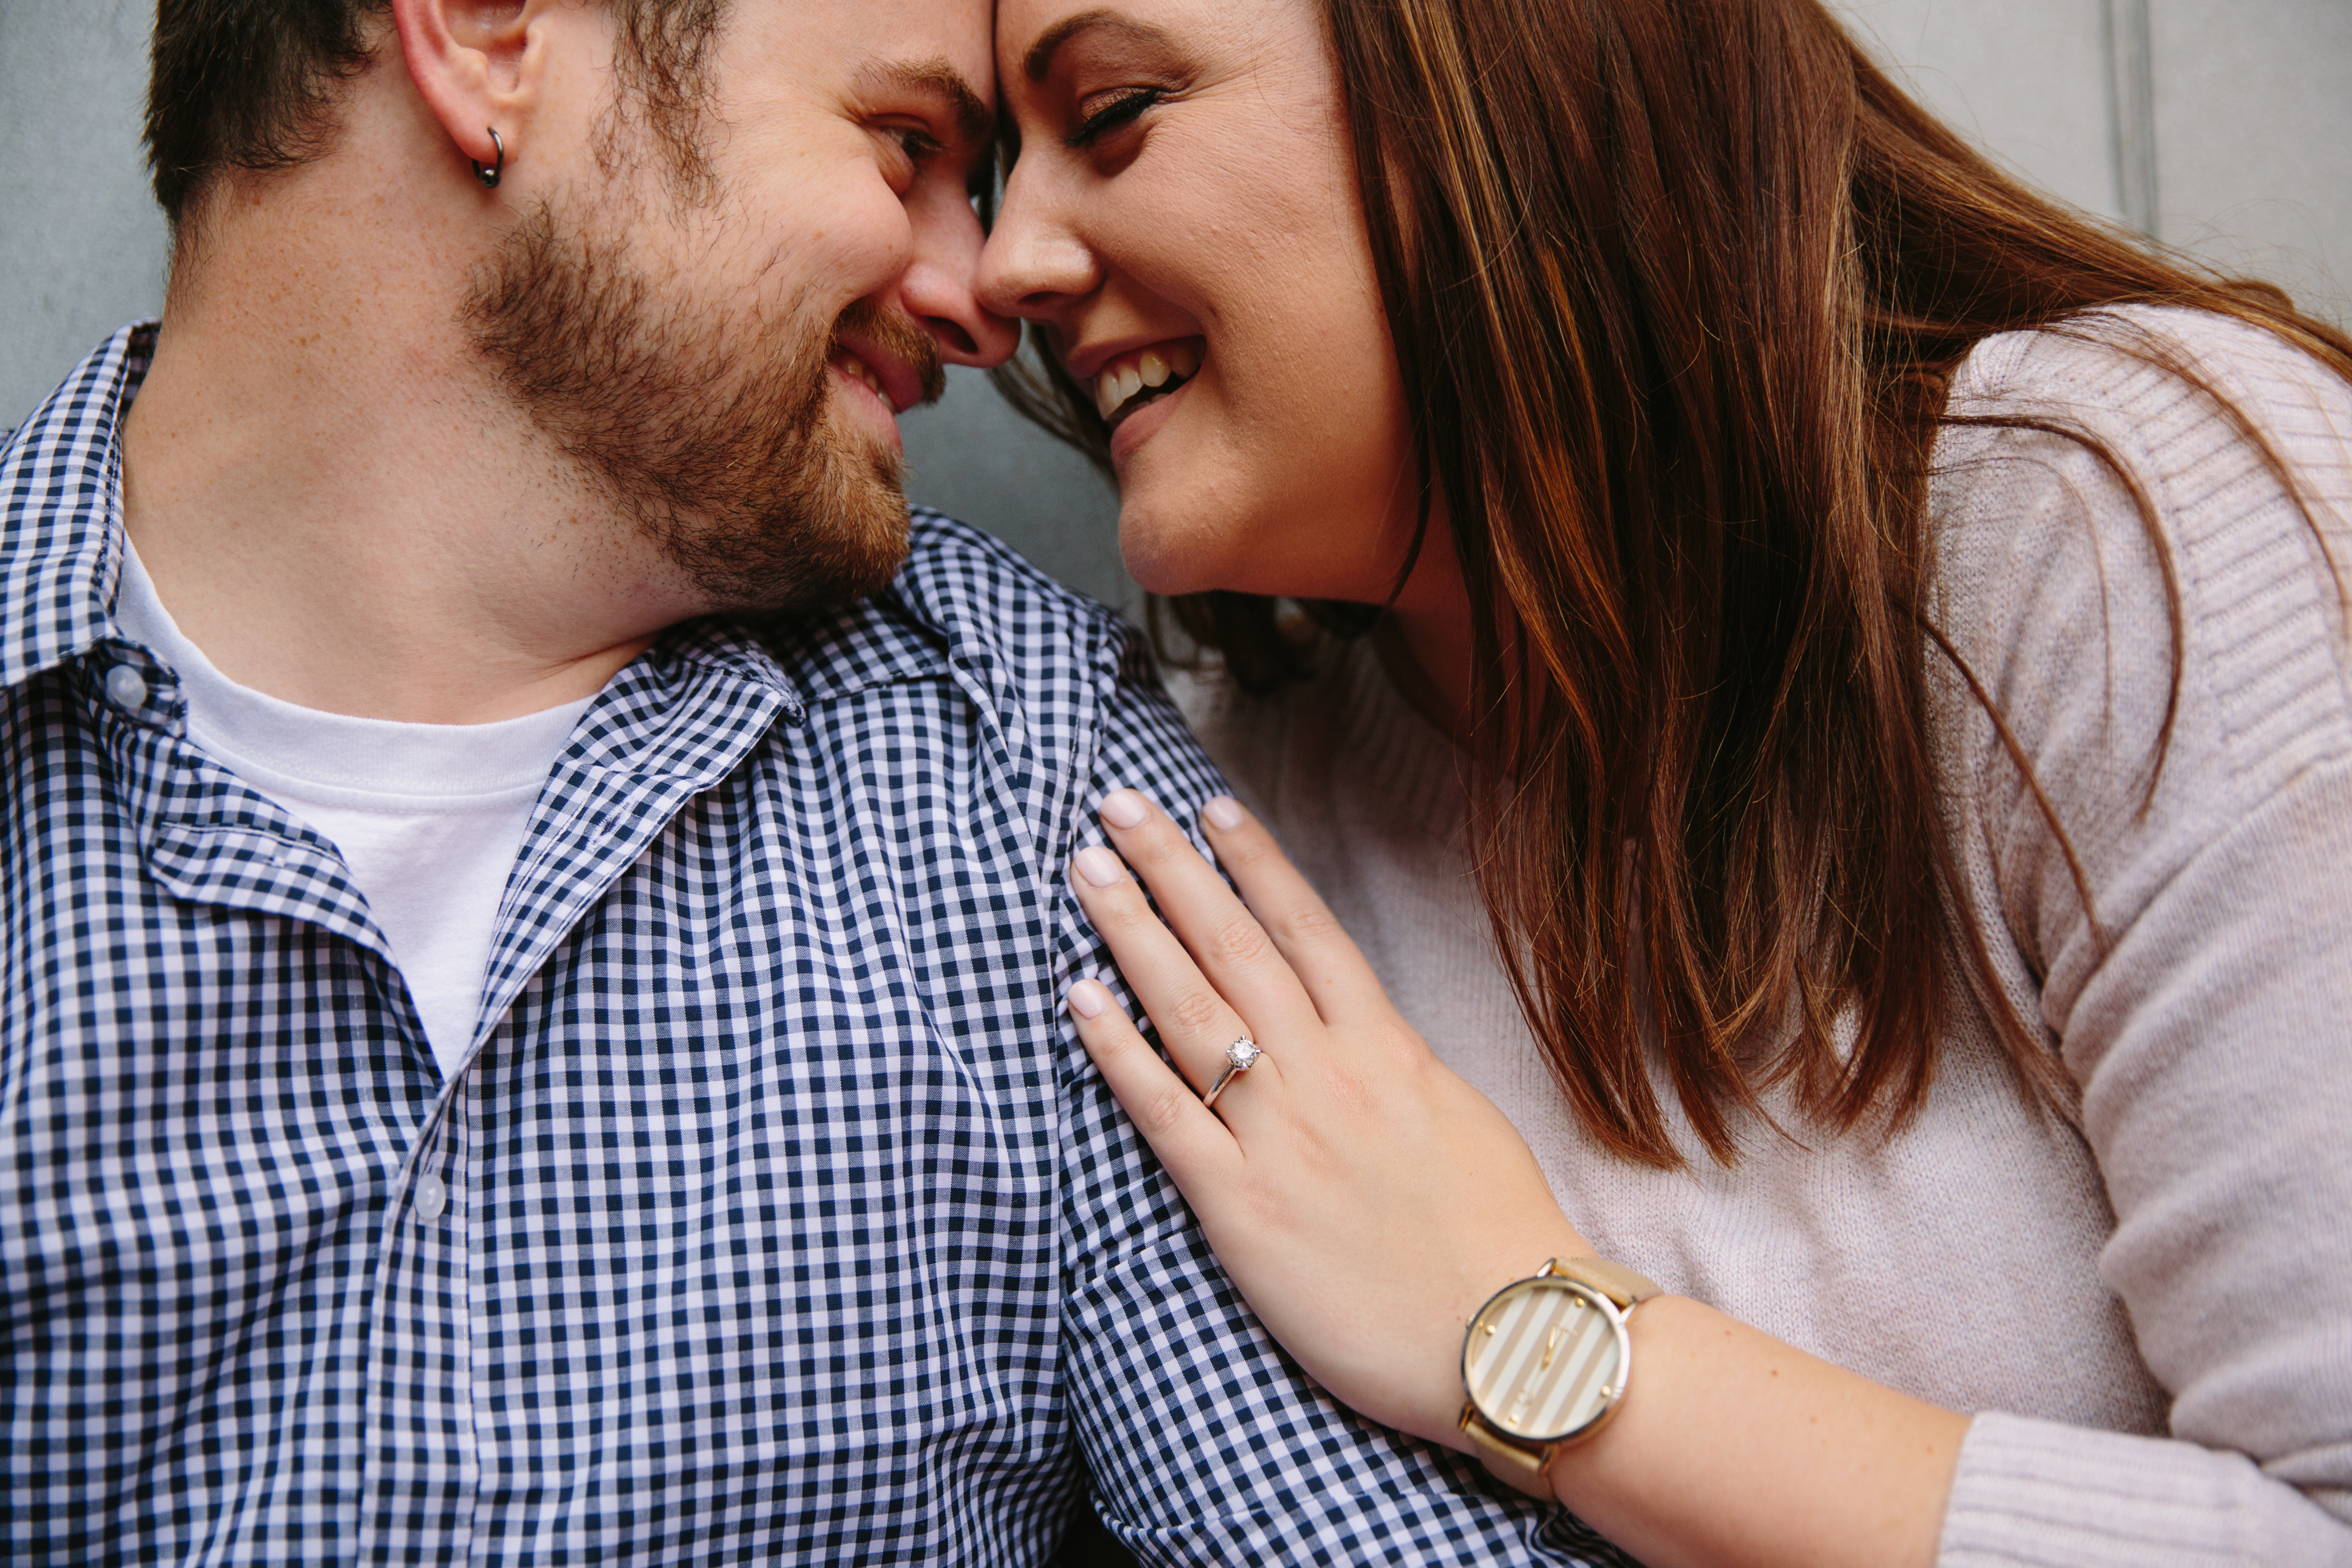 dubuque engagement session by catherine furlin photography, couple snuggling in millwork district